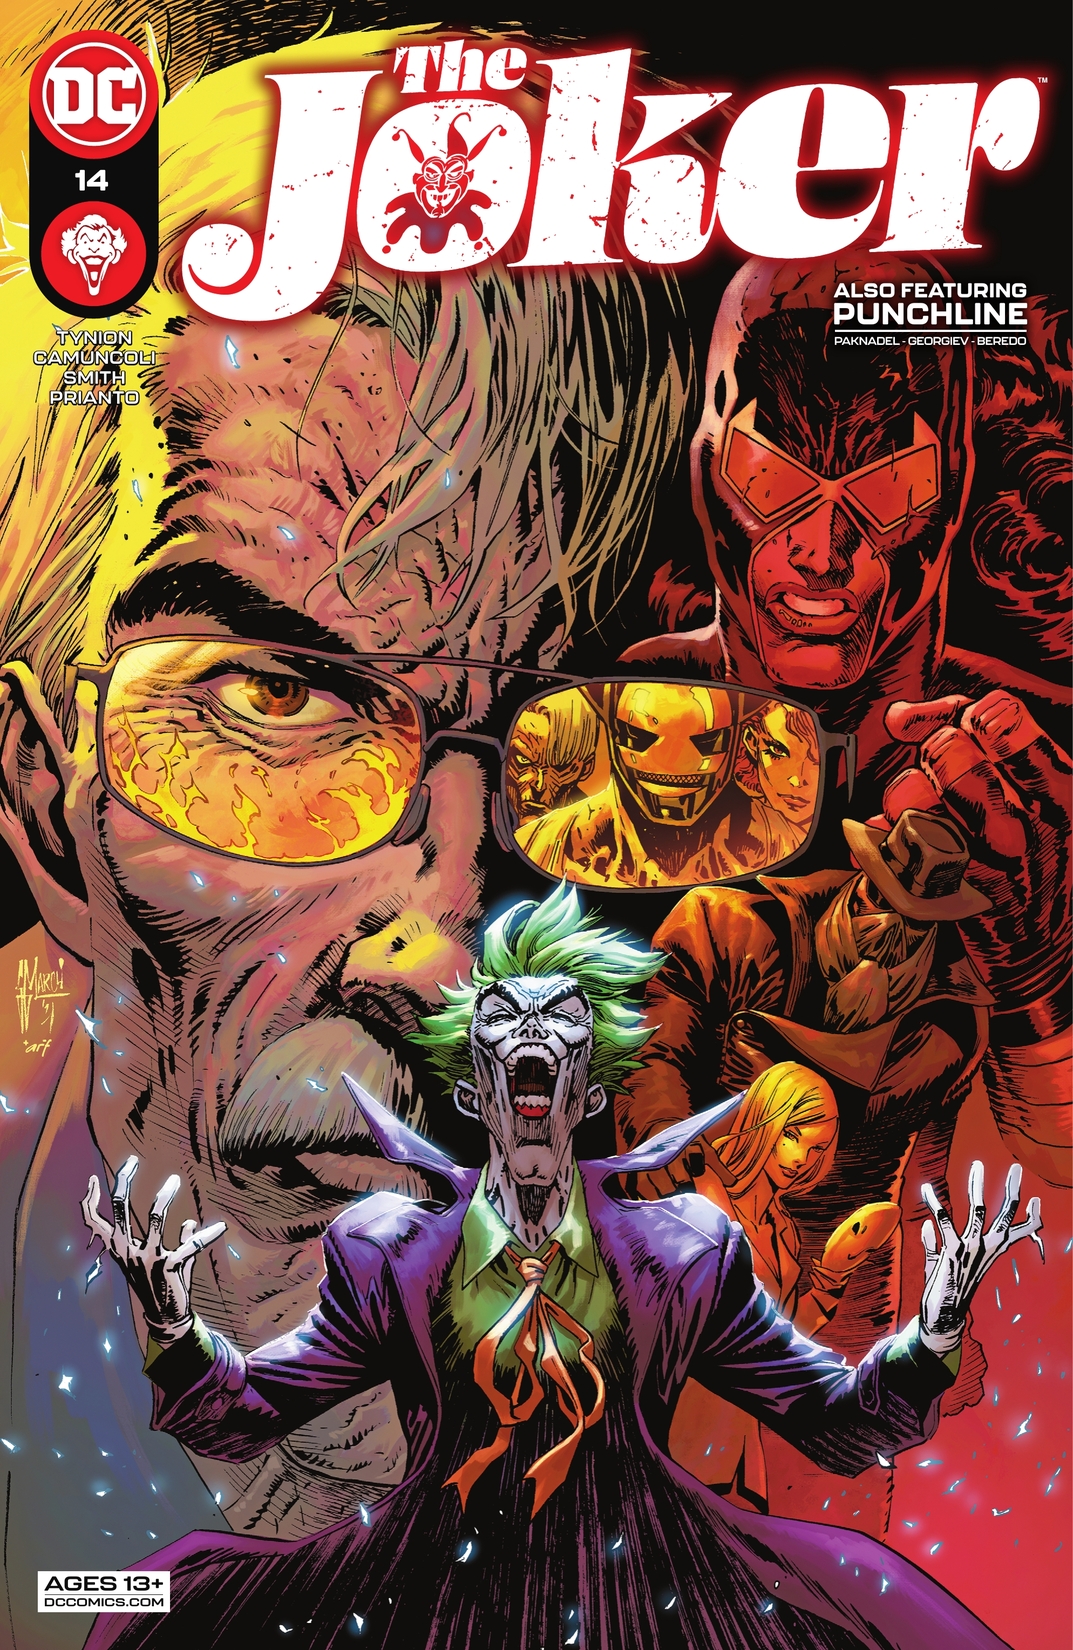 The Joker #14 preview images